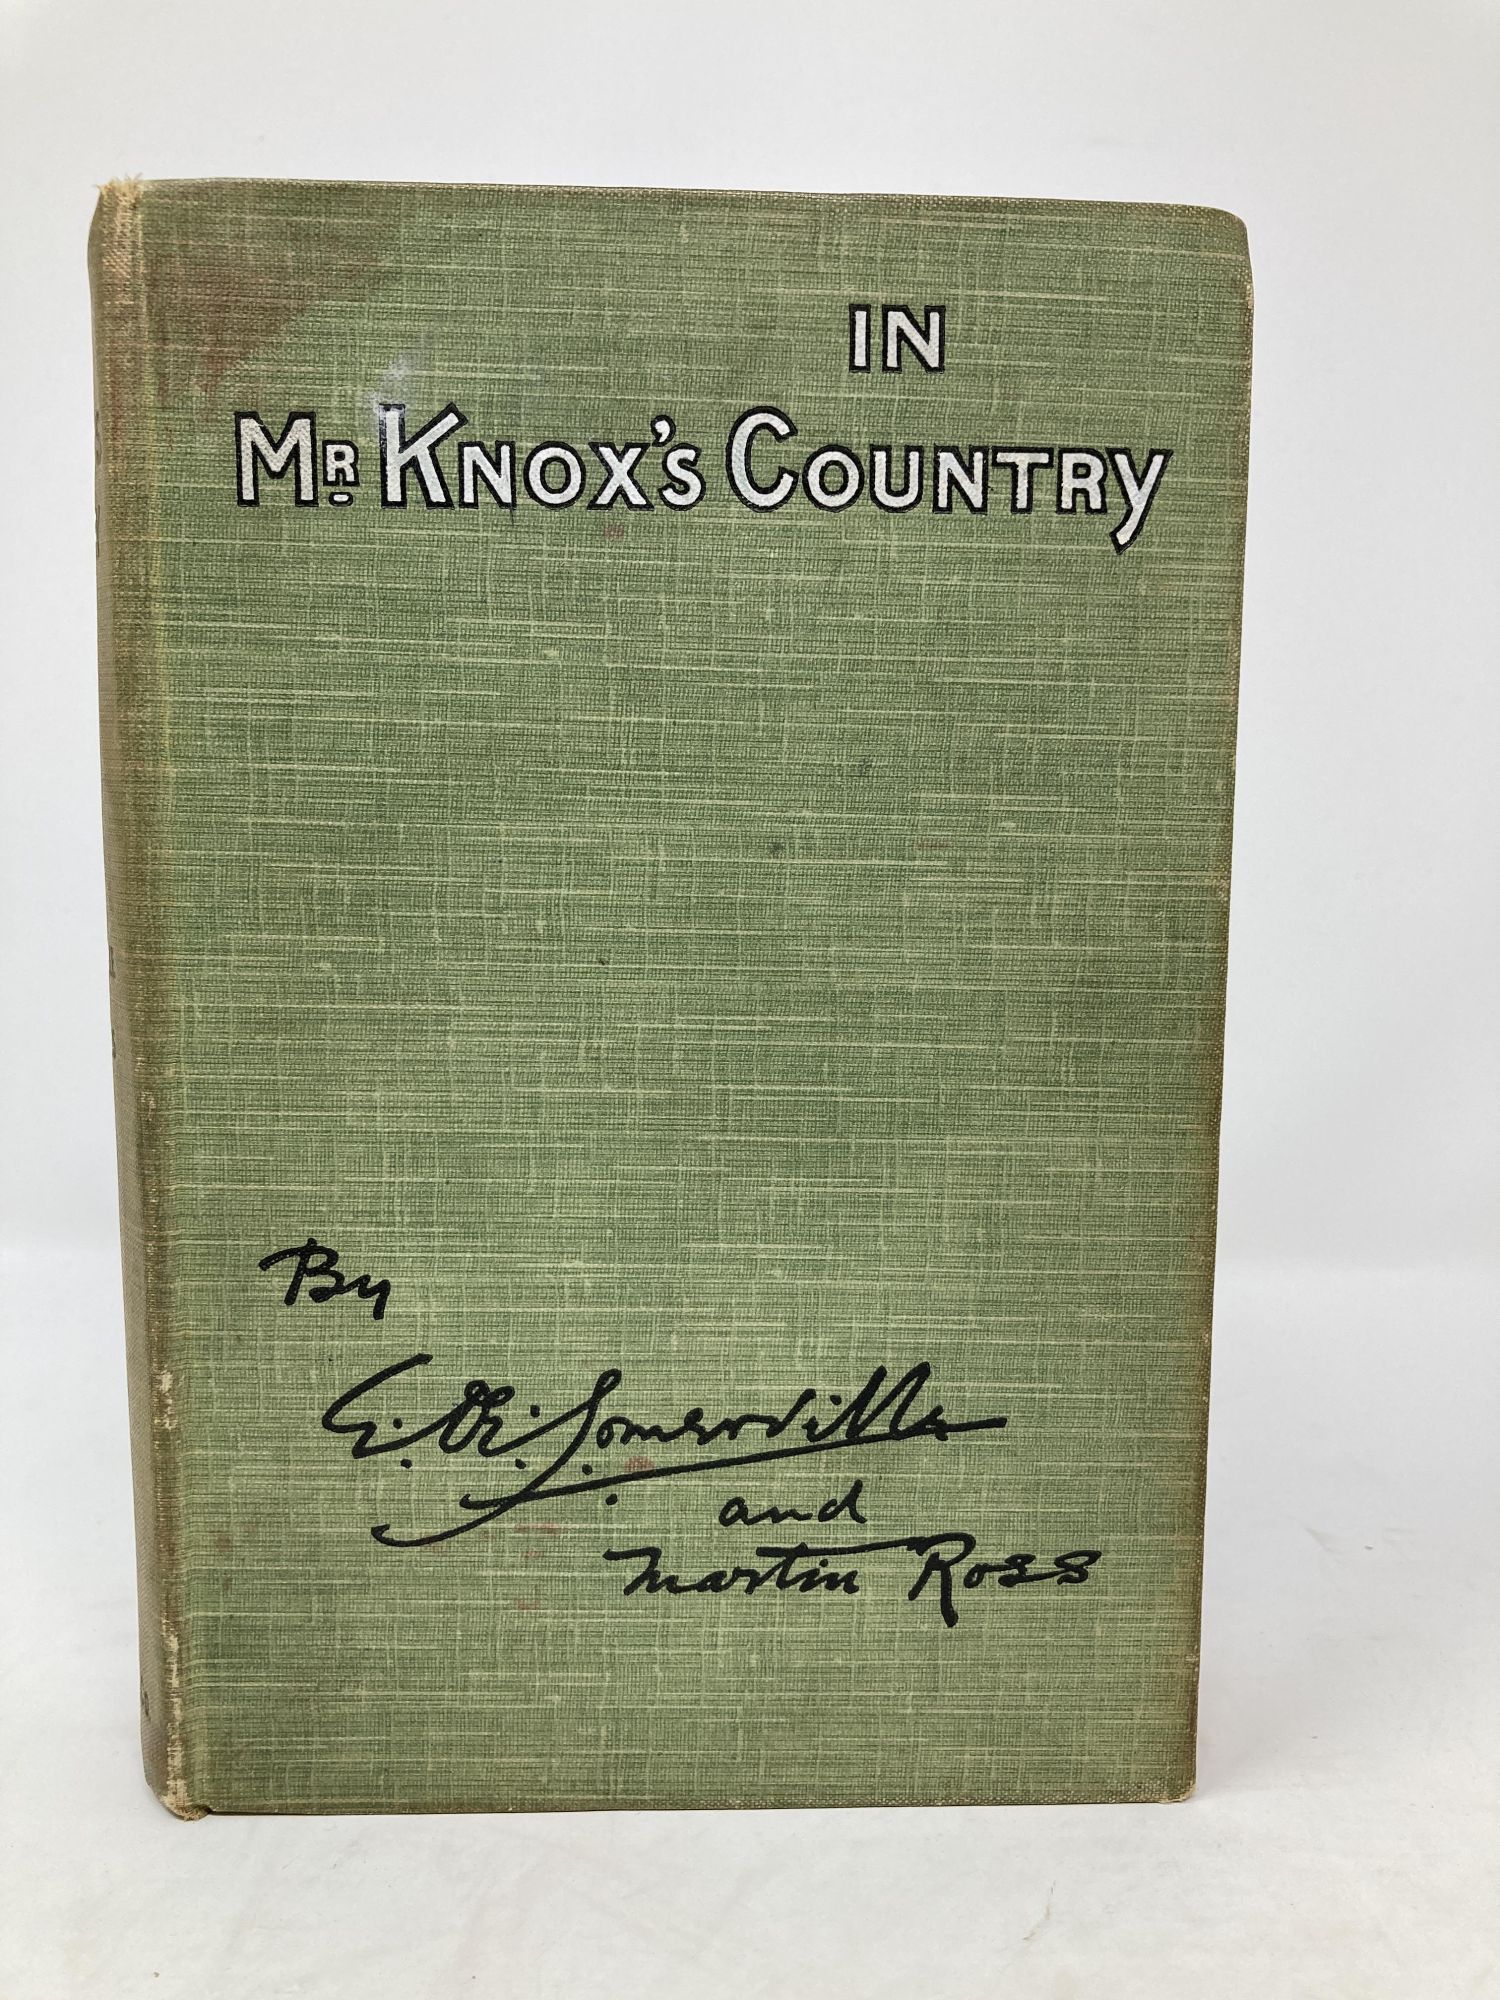 Somerville, E. OE. and Martin Ross - In Mr. Knox's Country (Signed)